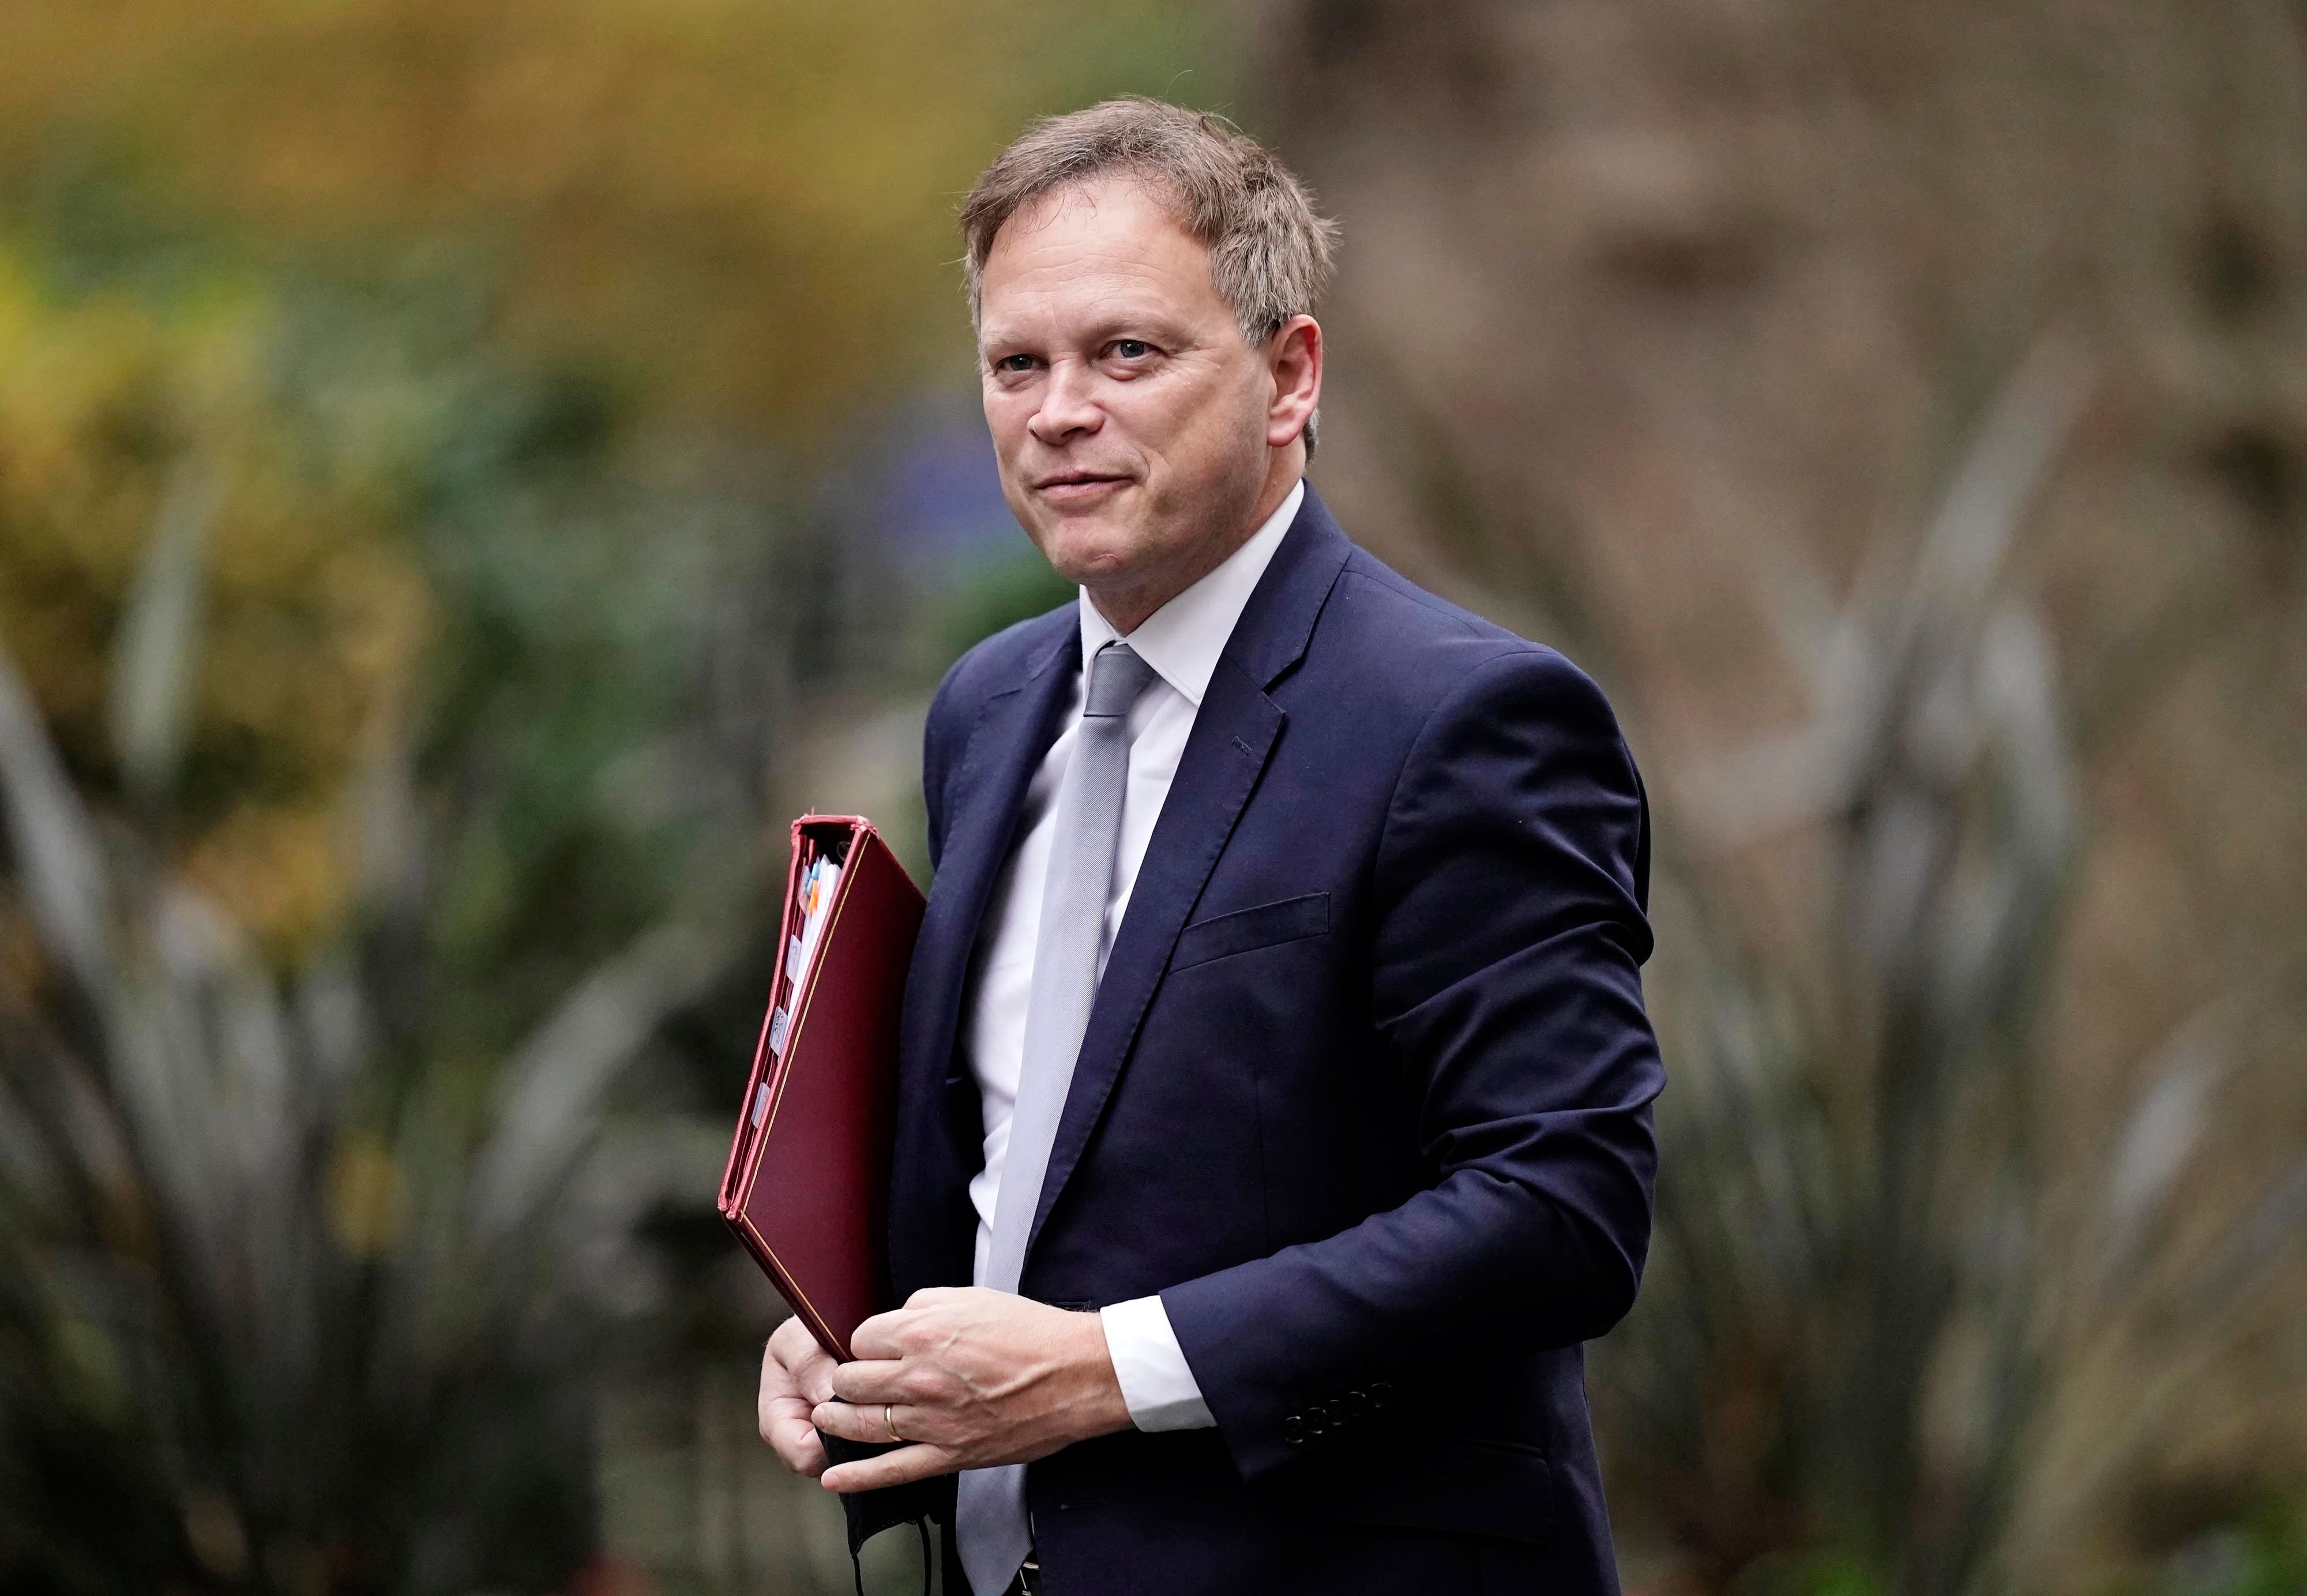 Transport minister Grant Shapps is an avowed aviation enthusiast, owning a private £100,000 Saratoga Piper plane